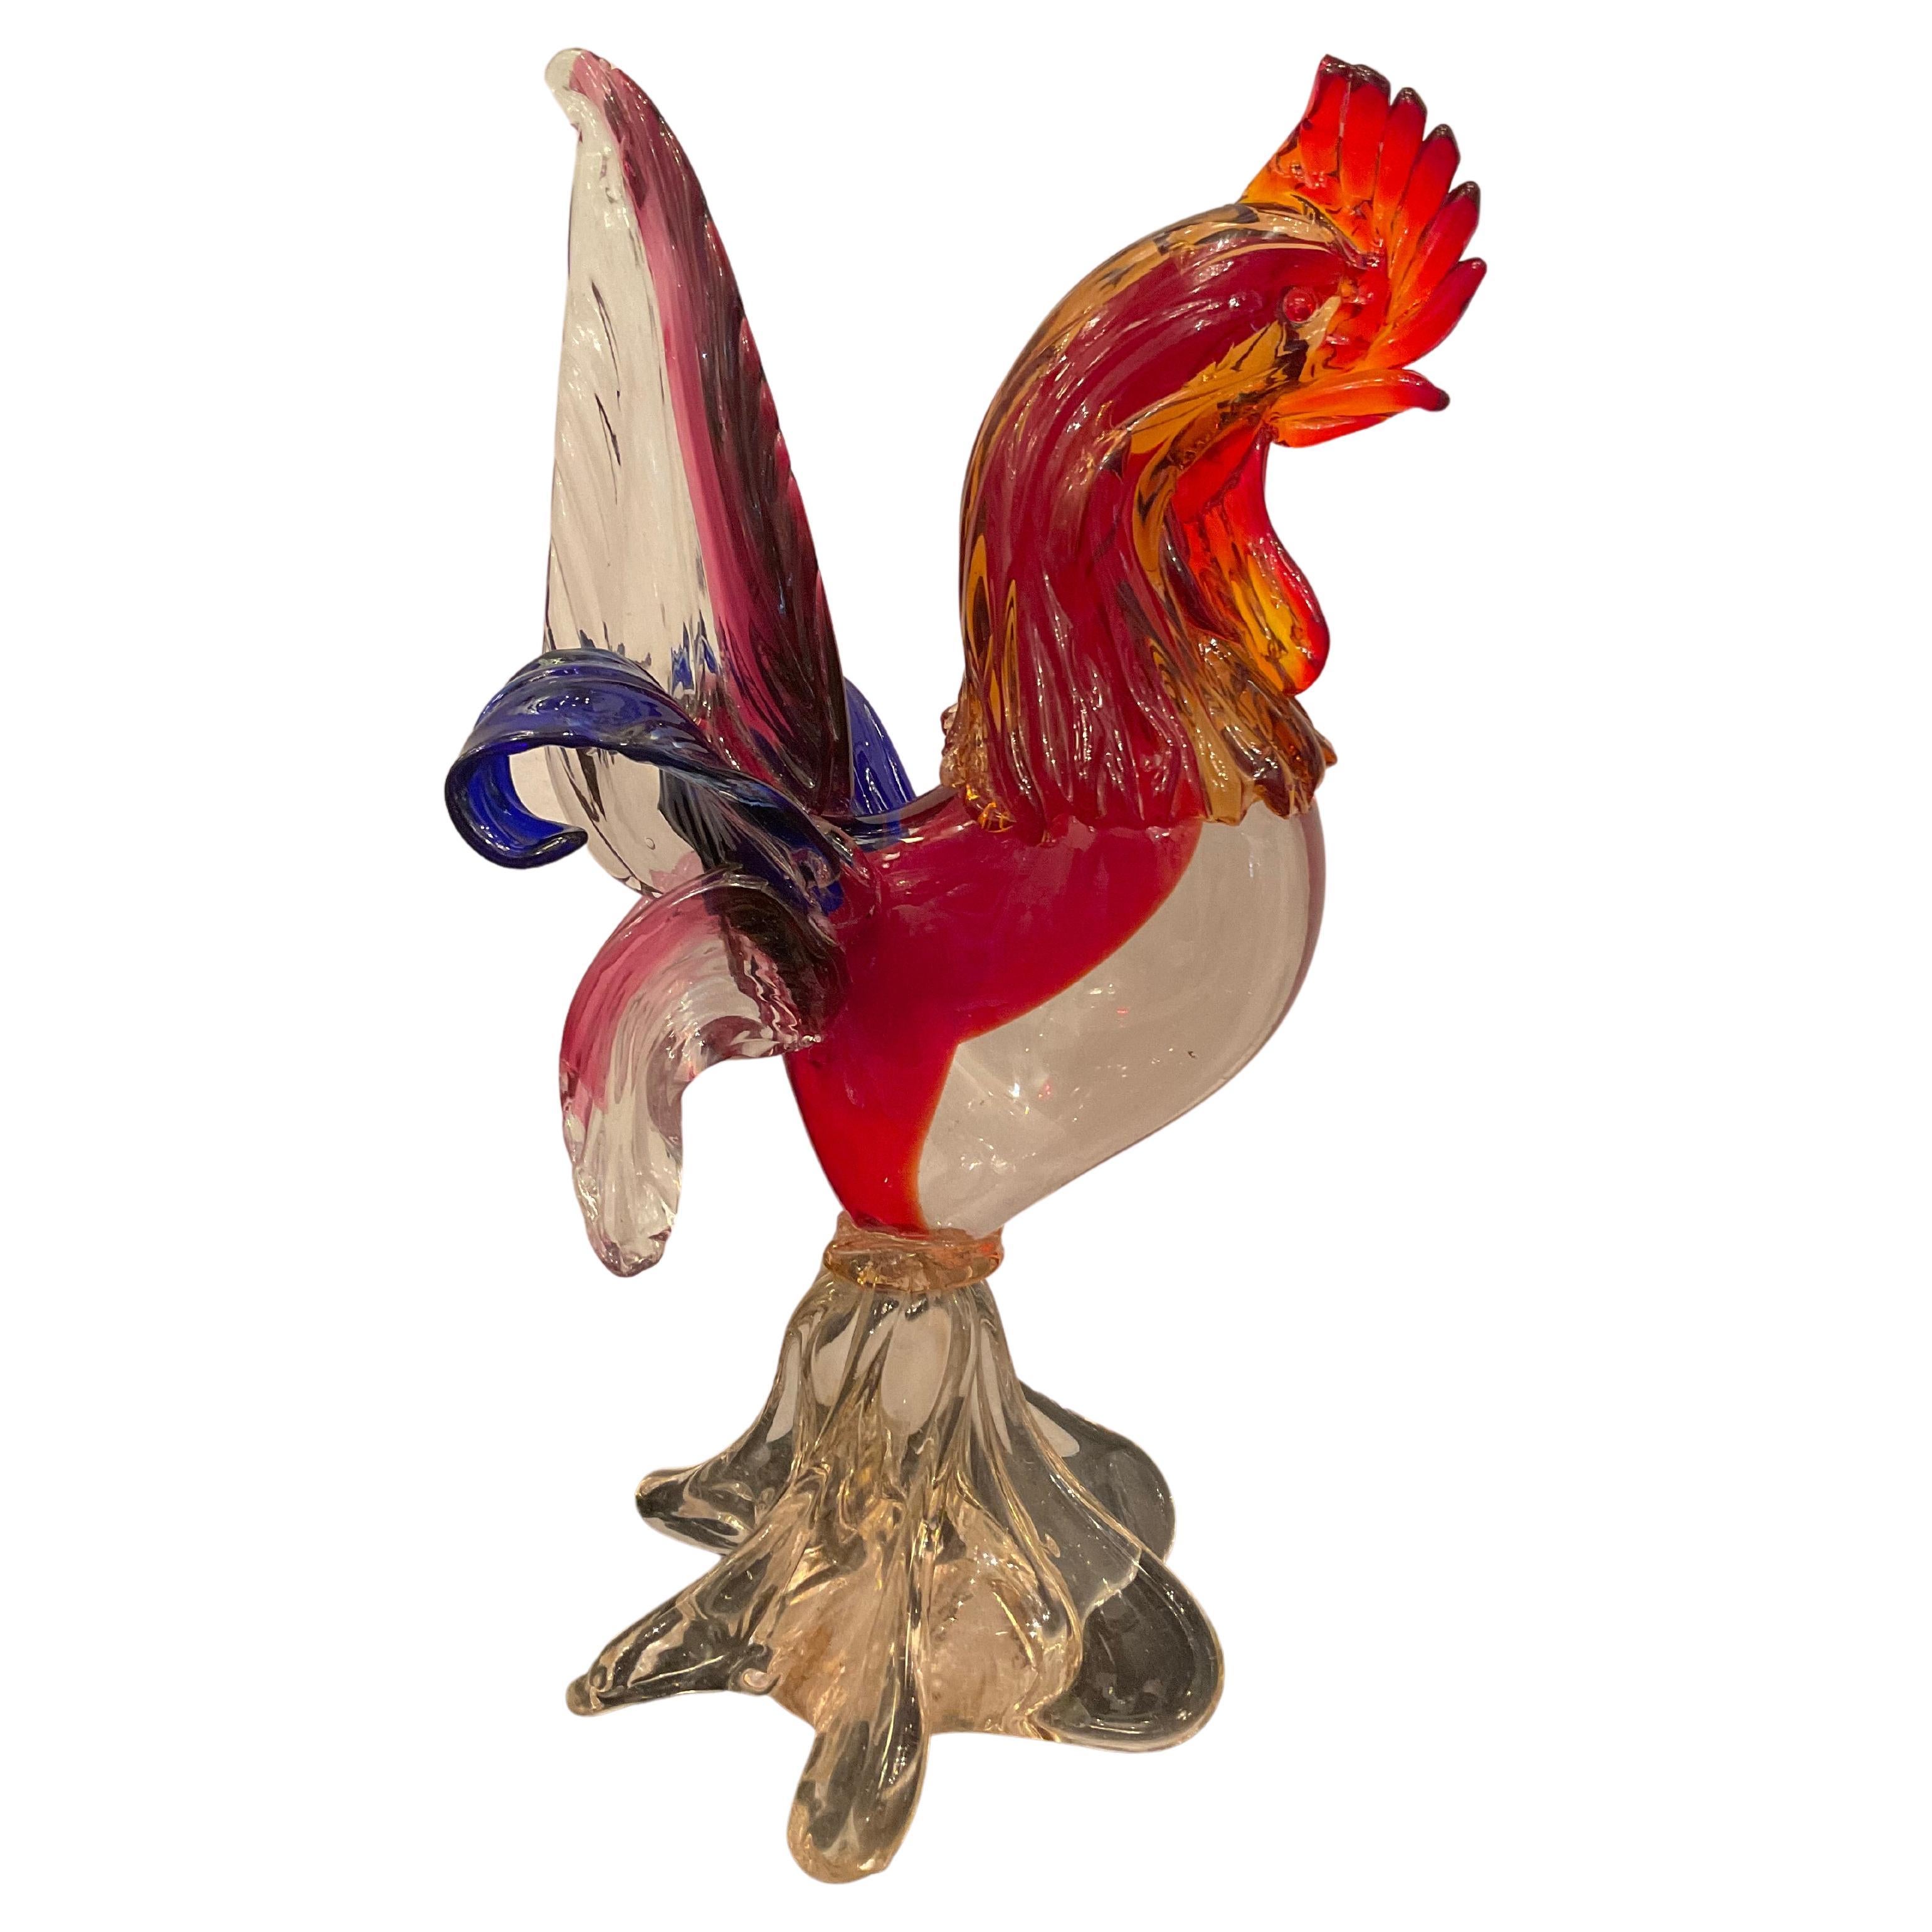 Murano glass rooster - 20th century